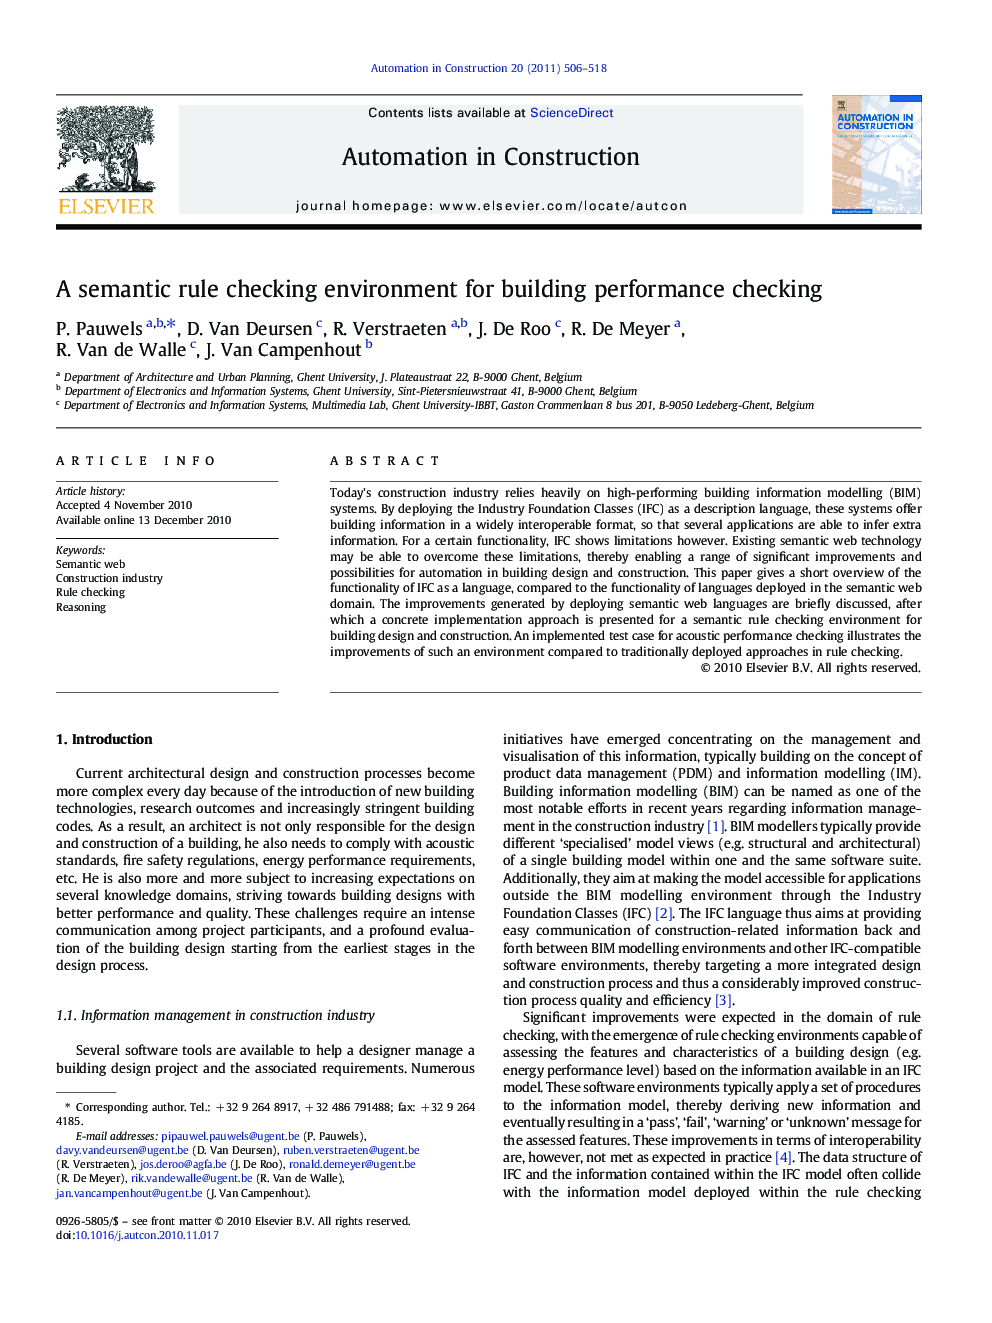 A semantic rule checking environment for building performance checking